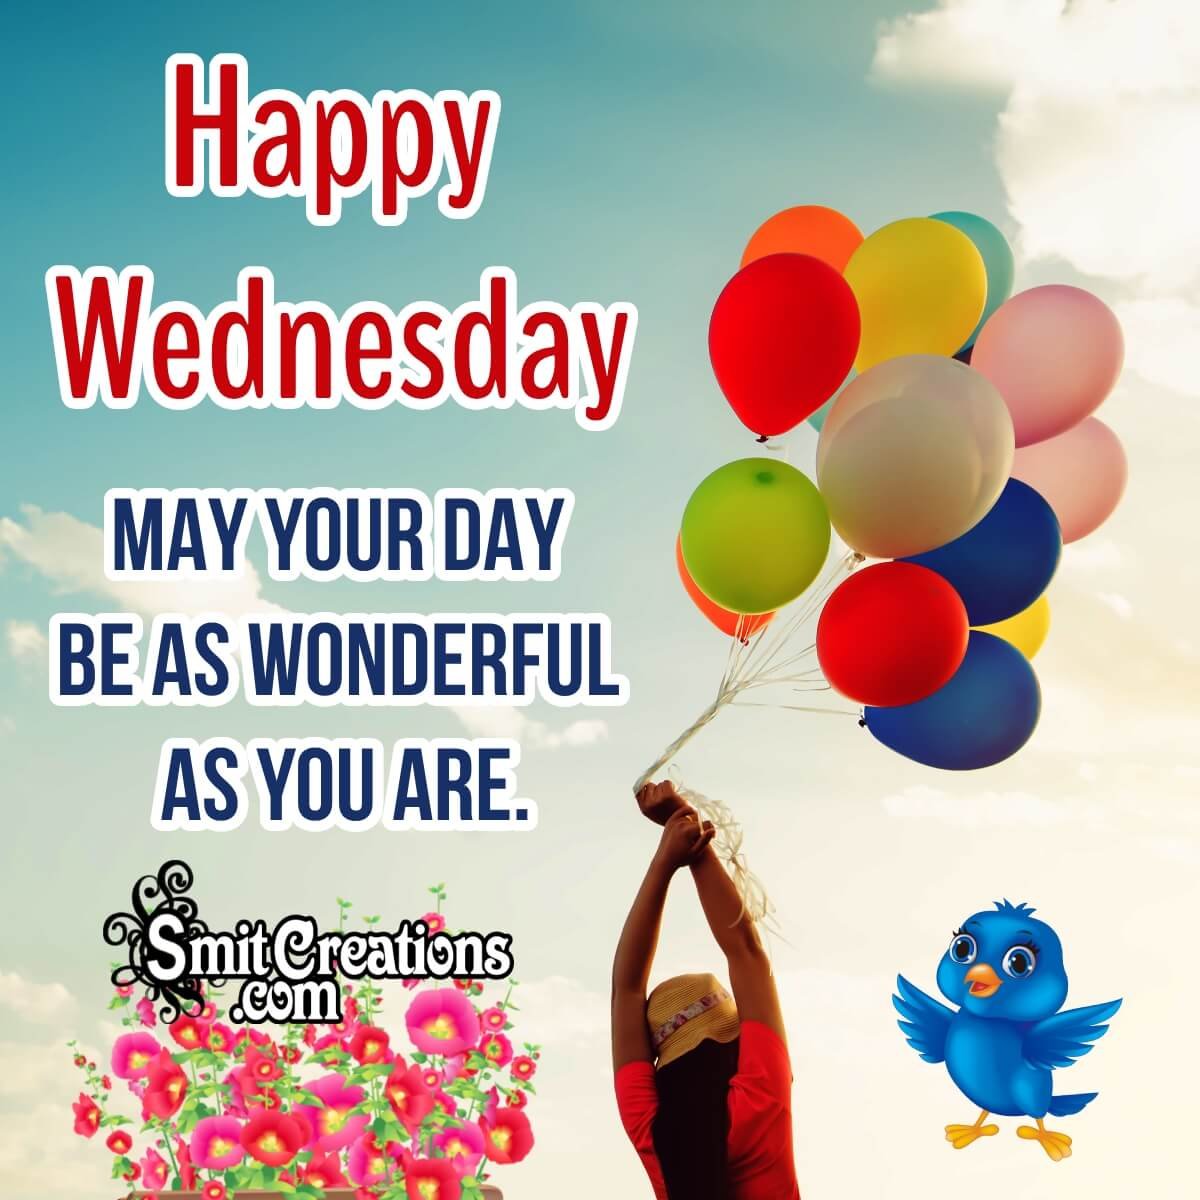 40 Good Morning Happy Wednesday Images - Smit Creations ...